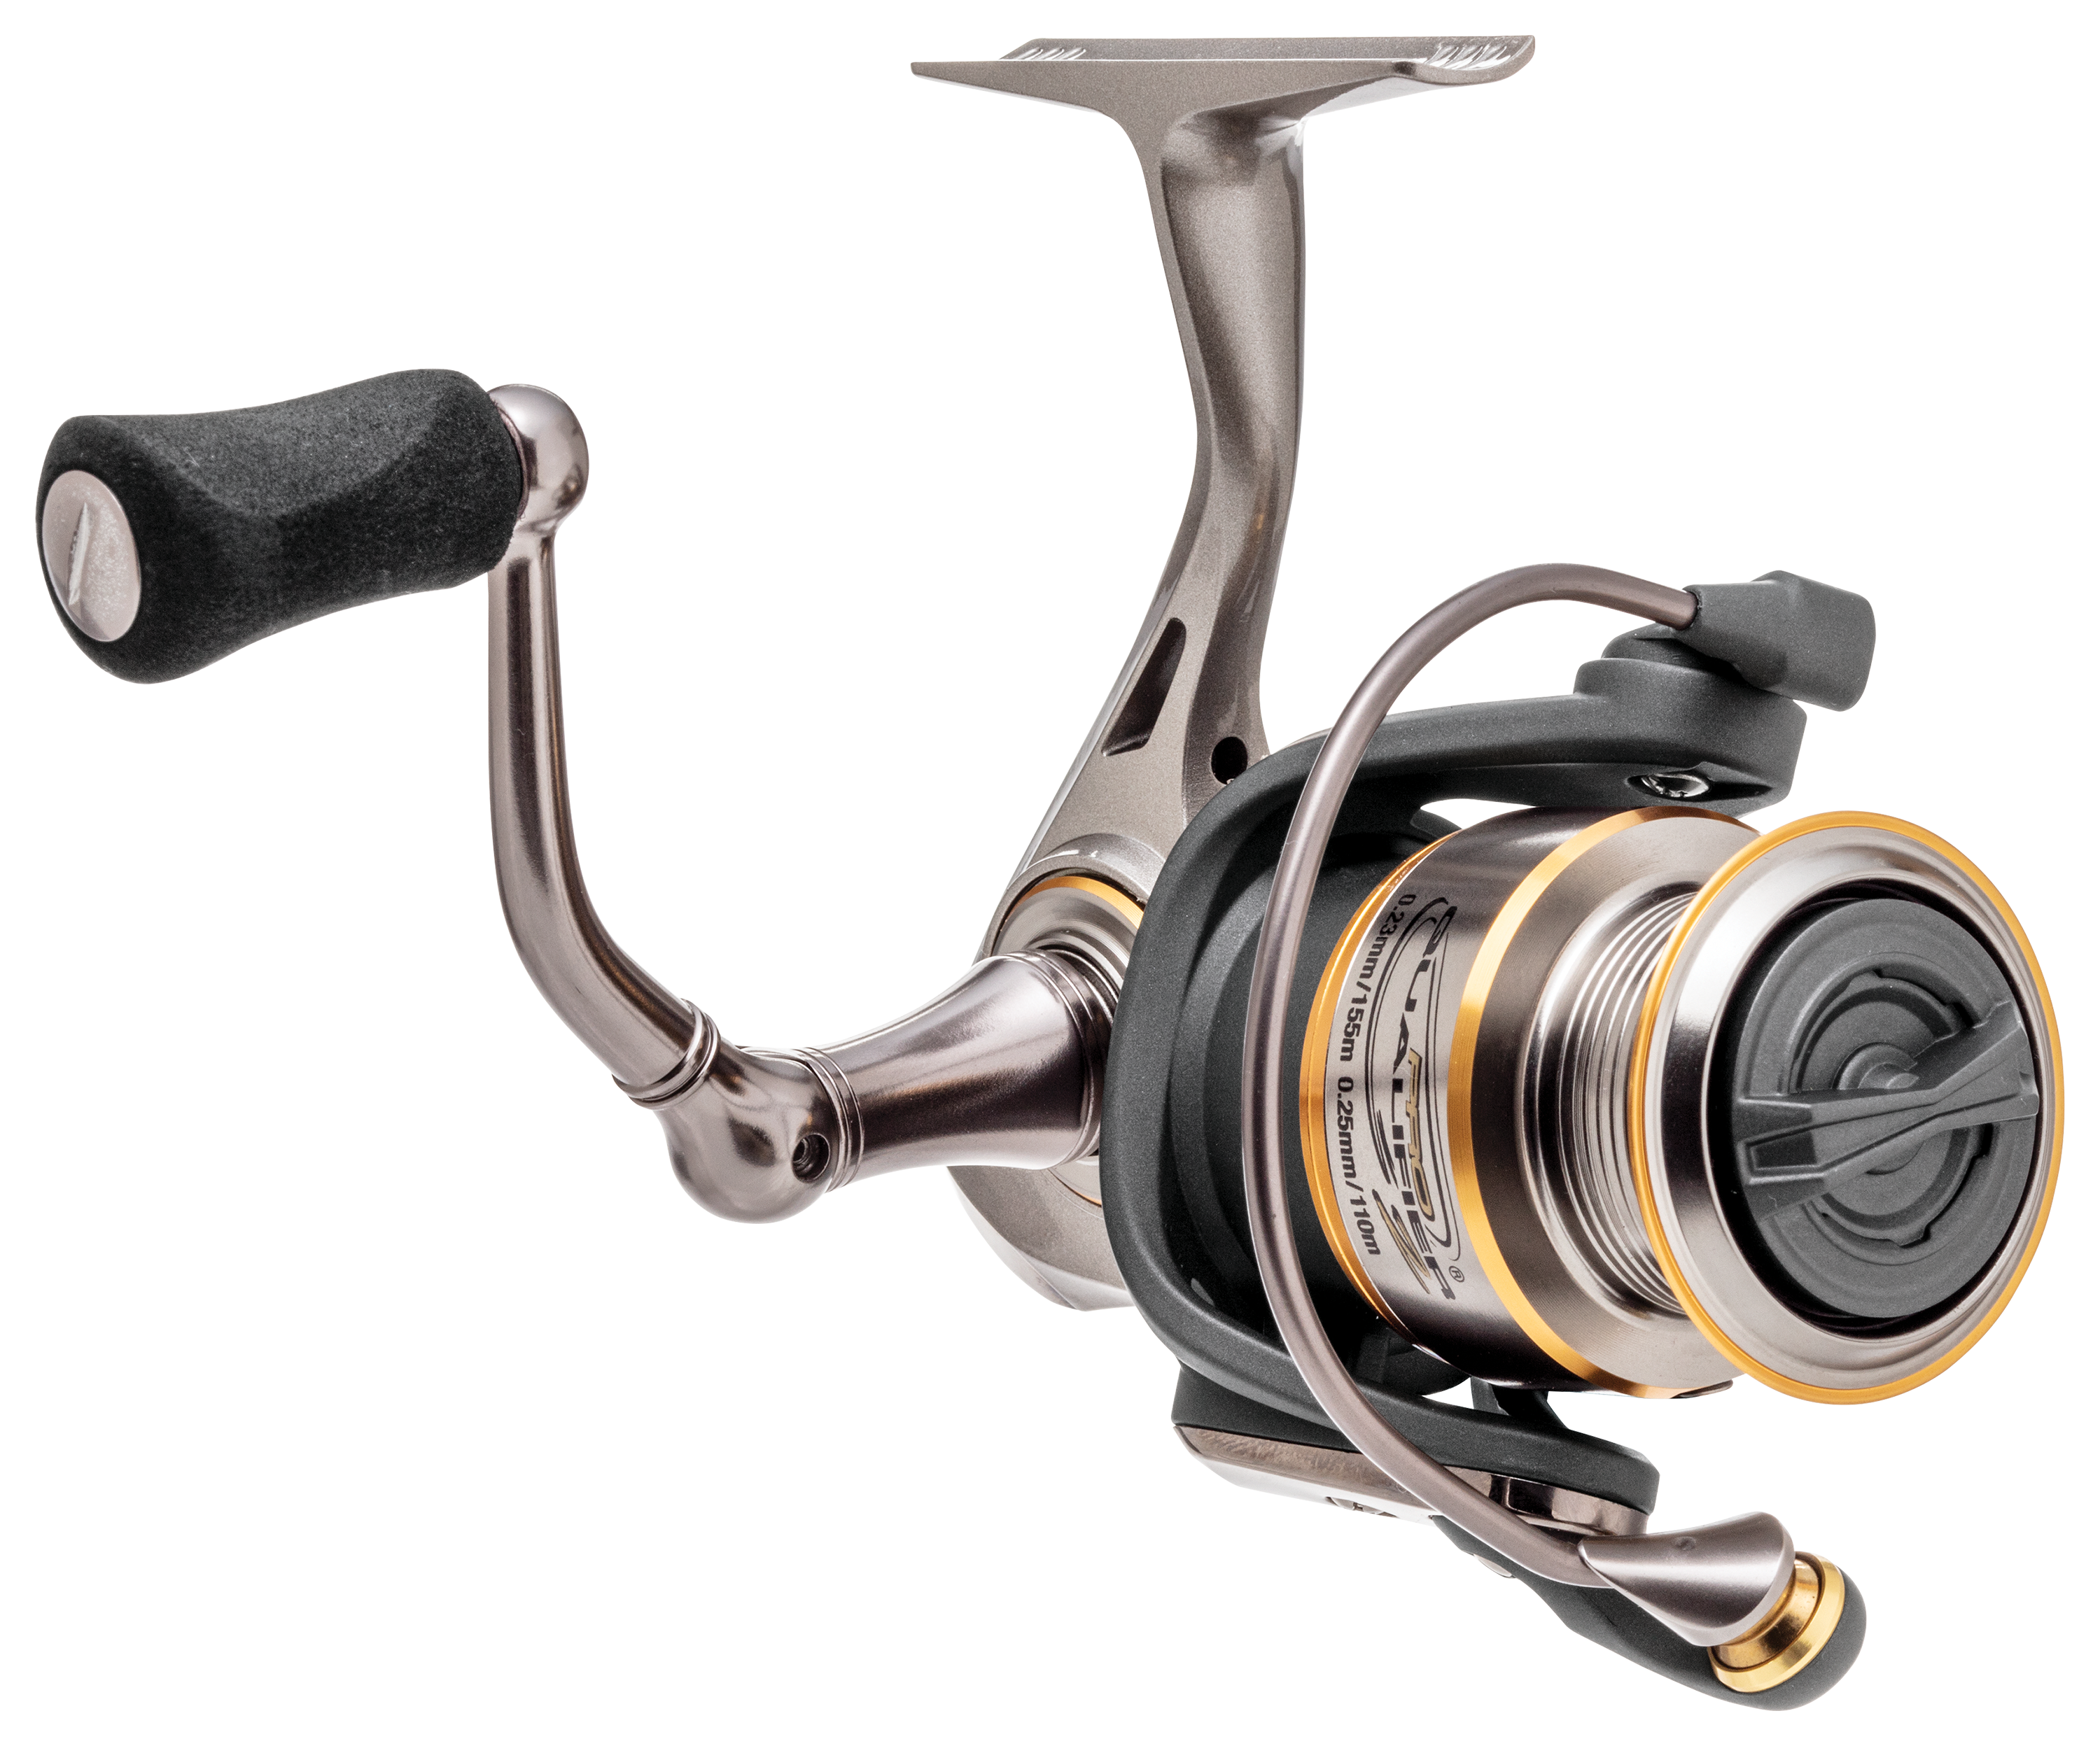 Bass Pro Shops Pro Qualifier 2 Spinning Reel